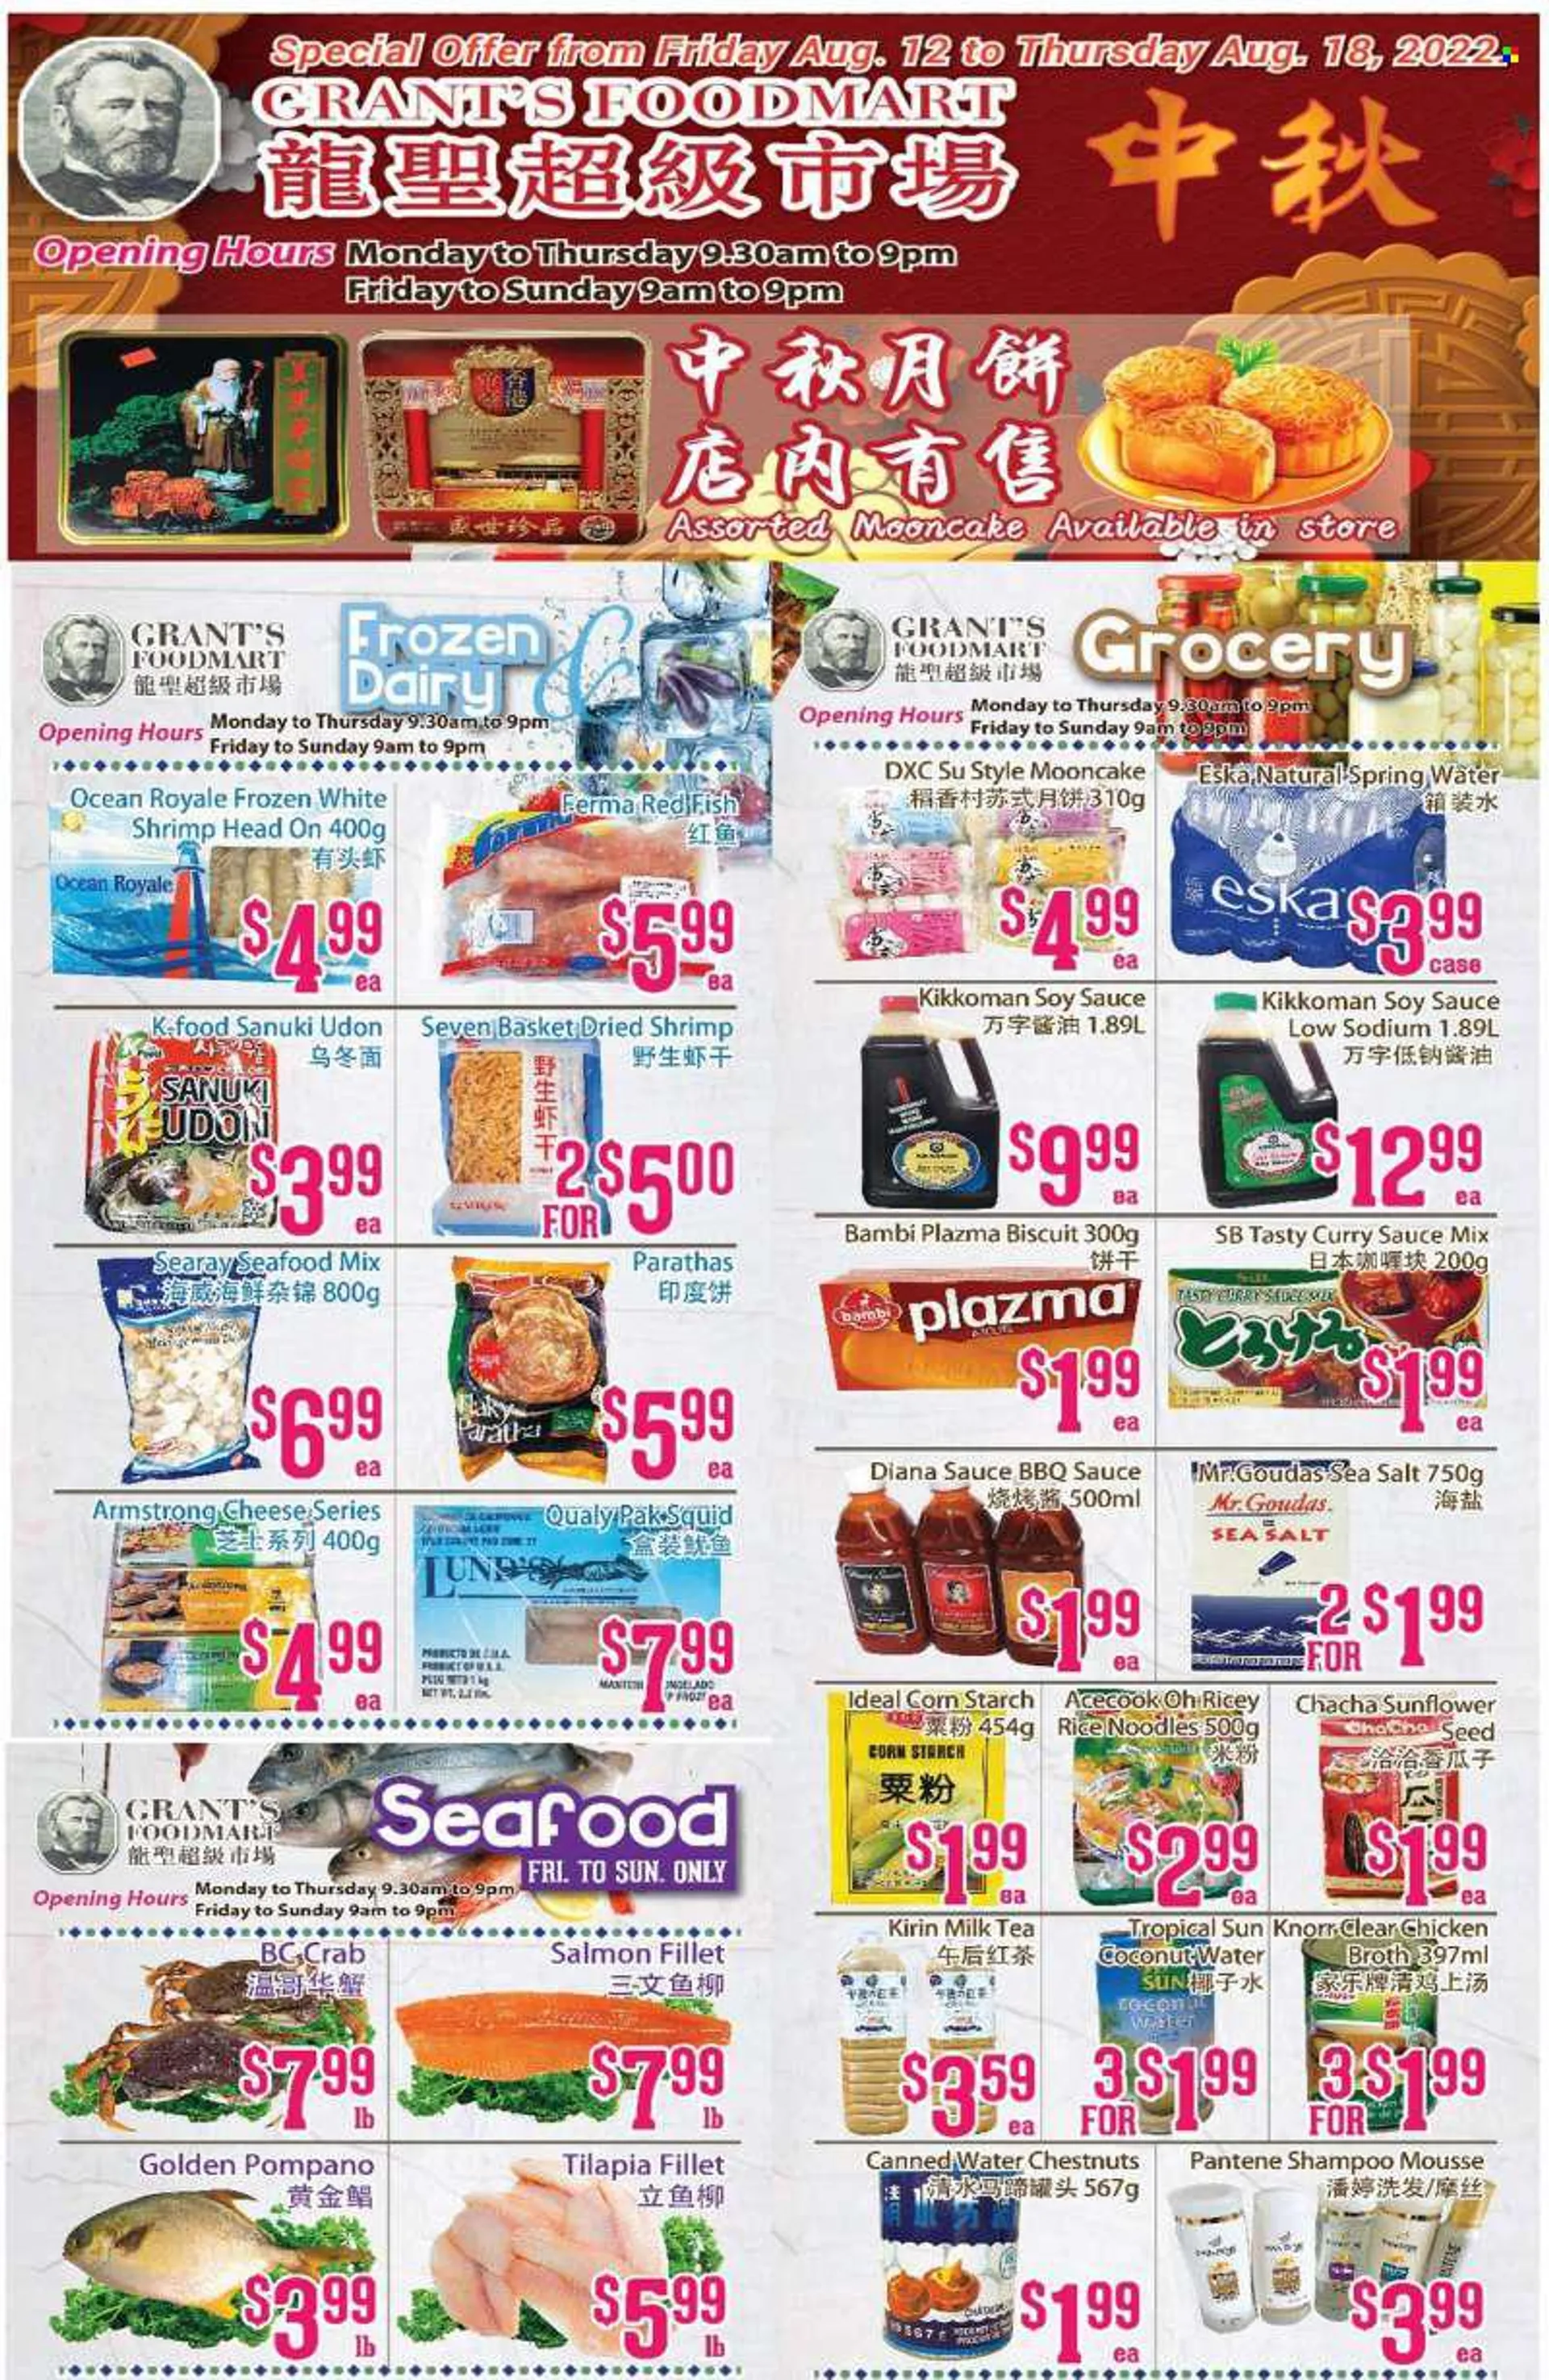 Grants Foodmart Flyer - August 12, 2022 - August 18, 2022 - Sales products - salmon, salmon fillet, squid, tilapia, pompano, seafood, crab, fish, shrimps, sauce, noodles, cheese, milk, biscuit, chicken broth, sea salt, broth, water chestnuts, rice vermice